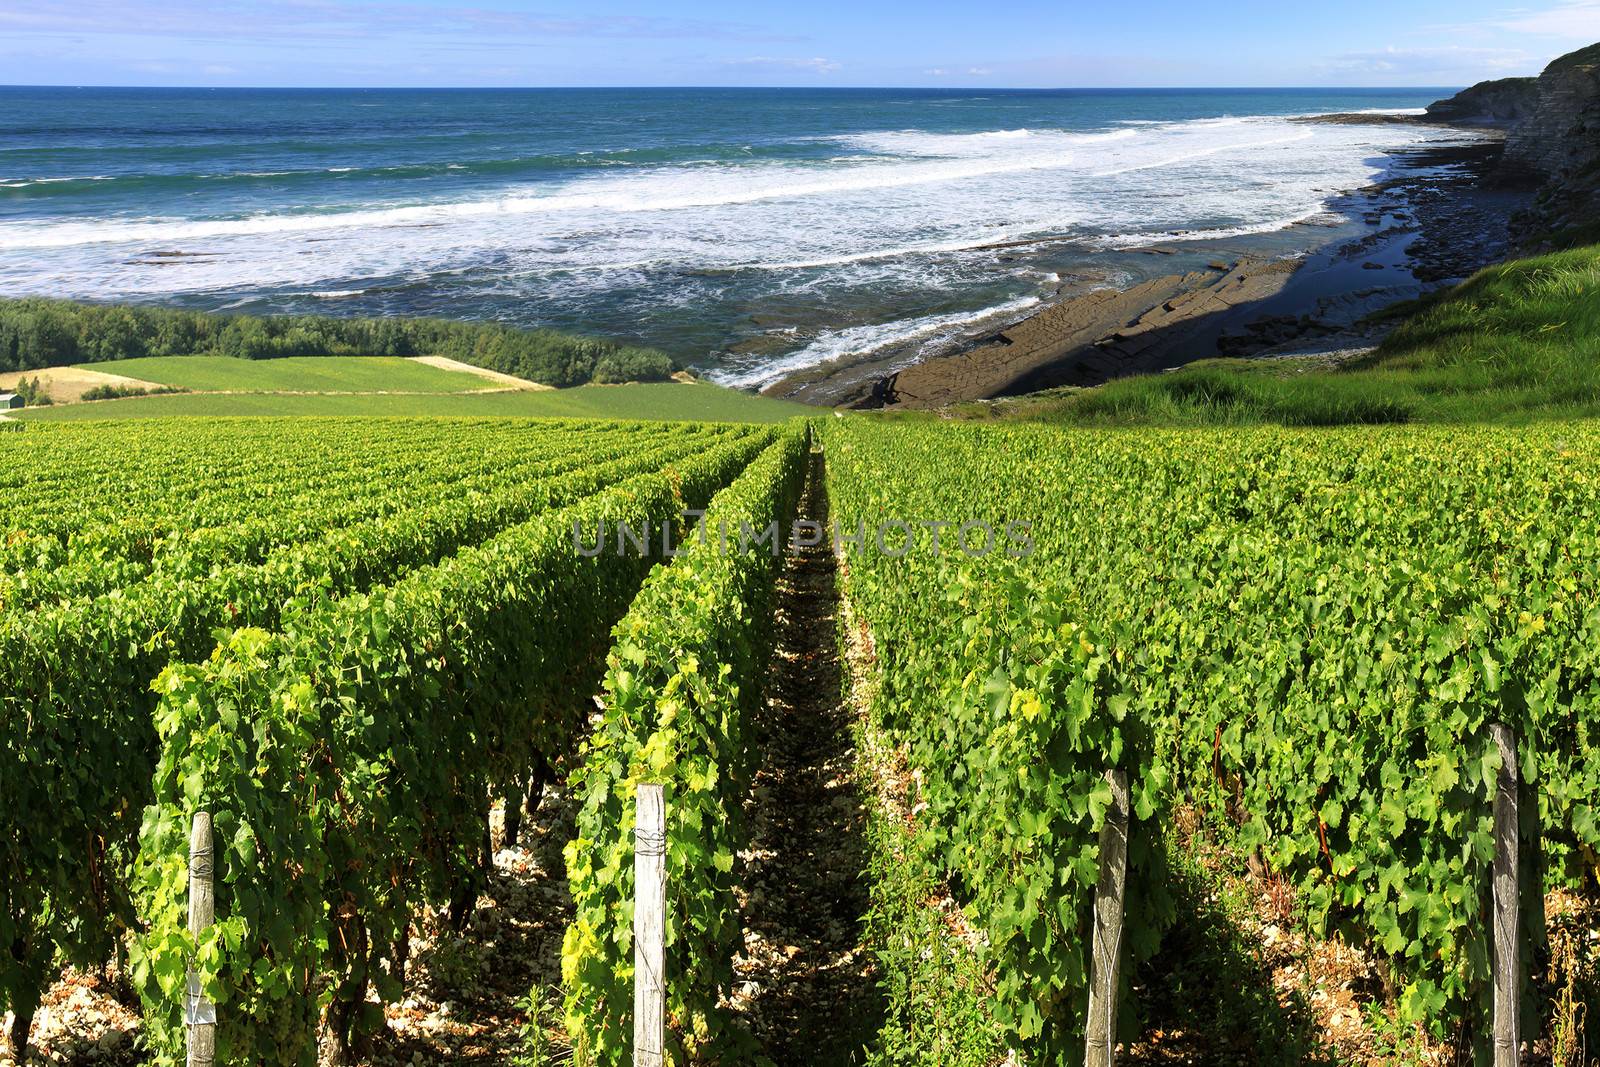 vineyard by the sea surrounded by a rugged coastline in summer under a blue sky